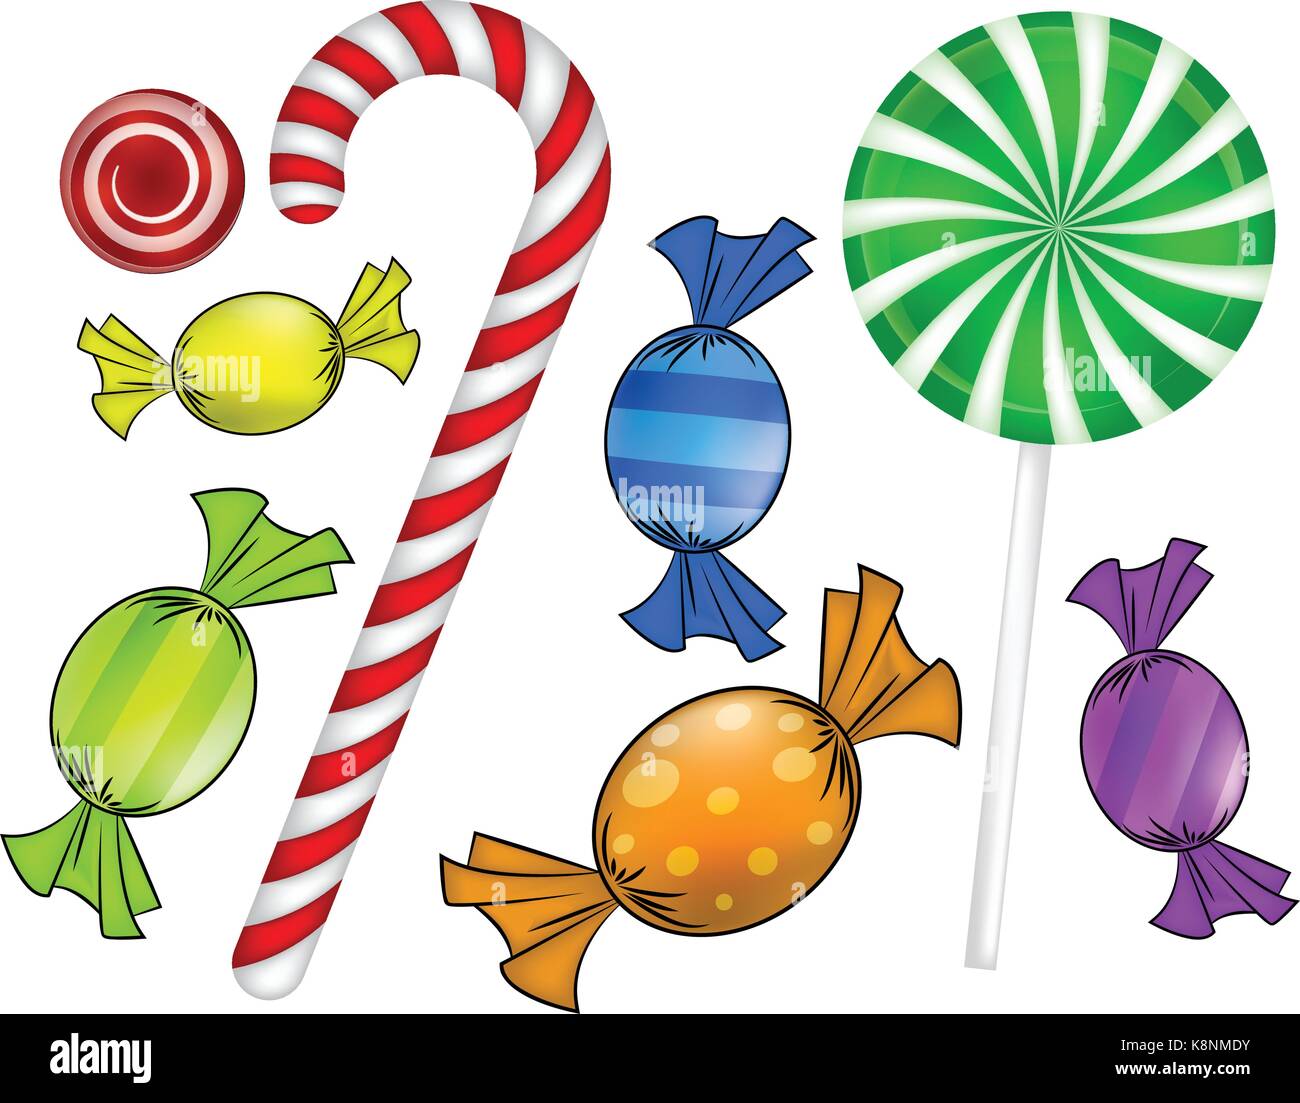 Christmas candy set. Colorful wrapped sweet, lollipop, cane. Vector illustration isolated on a white background. Stock Vector